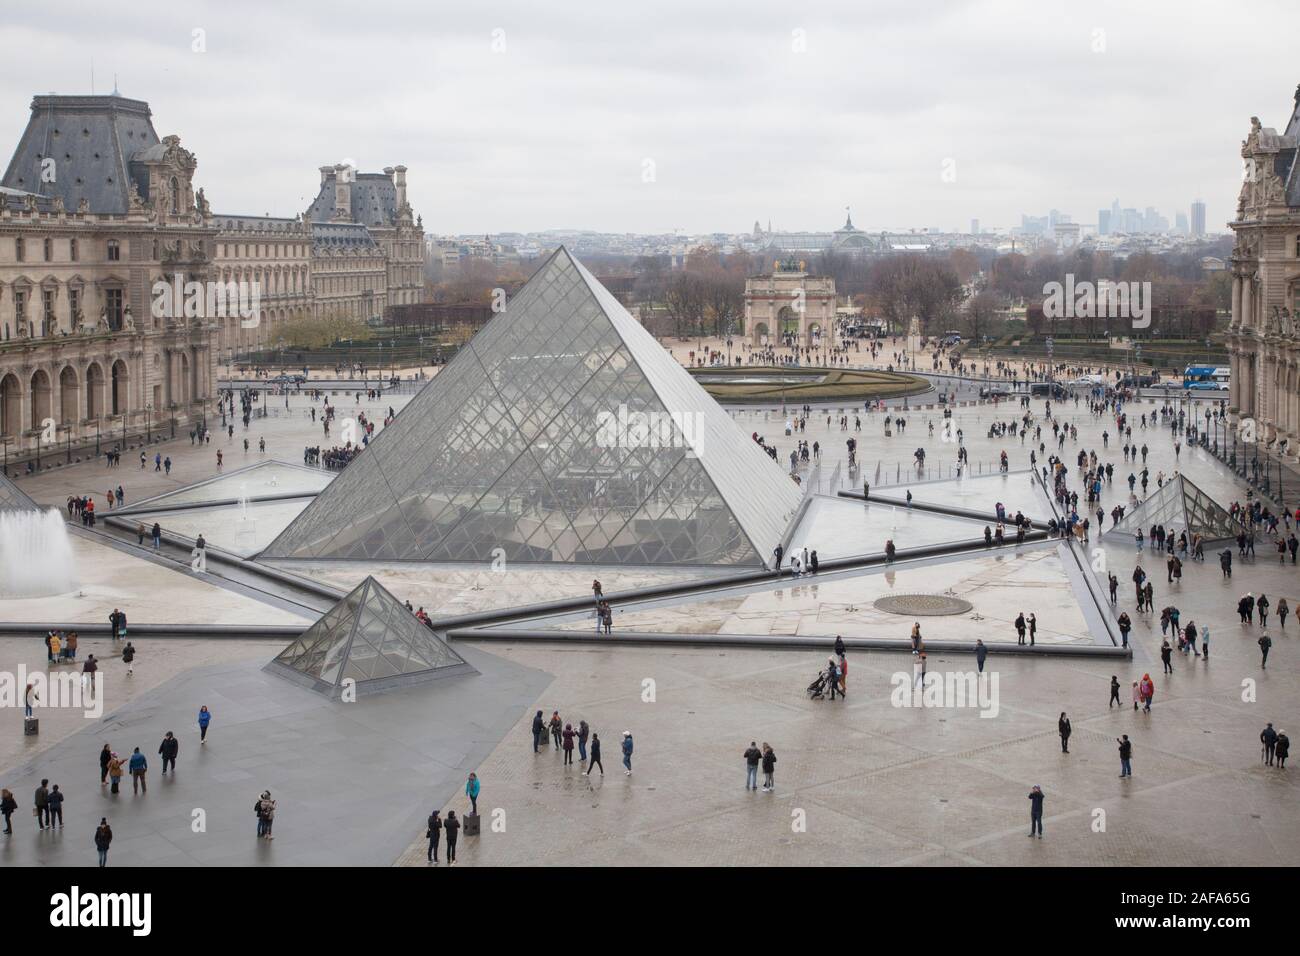 The glass pyramid entrance in the courtyard of the Louvre Museum in Paris looking towards the Arc de Triomphe du Carrousel Stock Photo